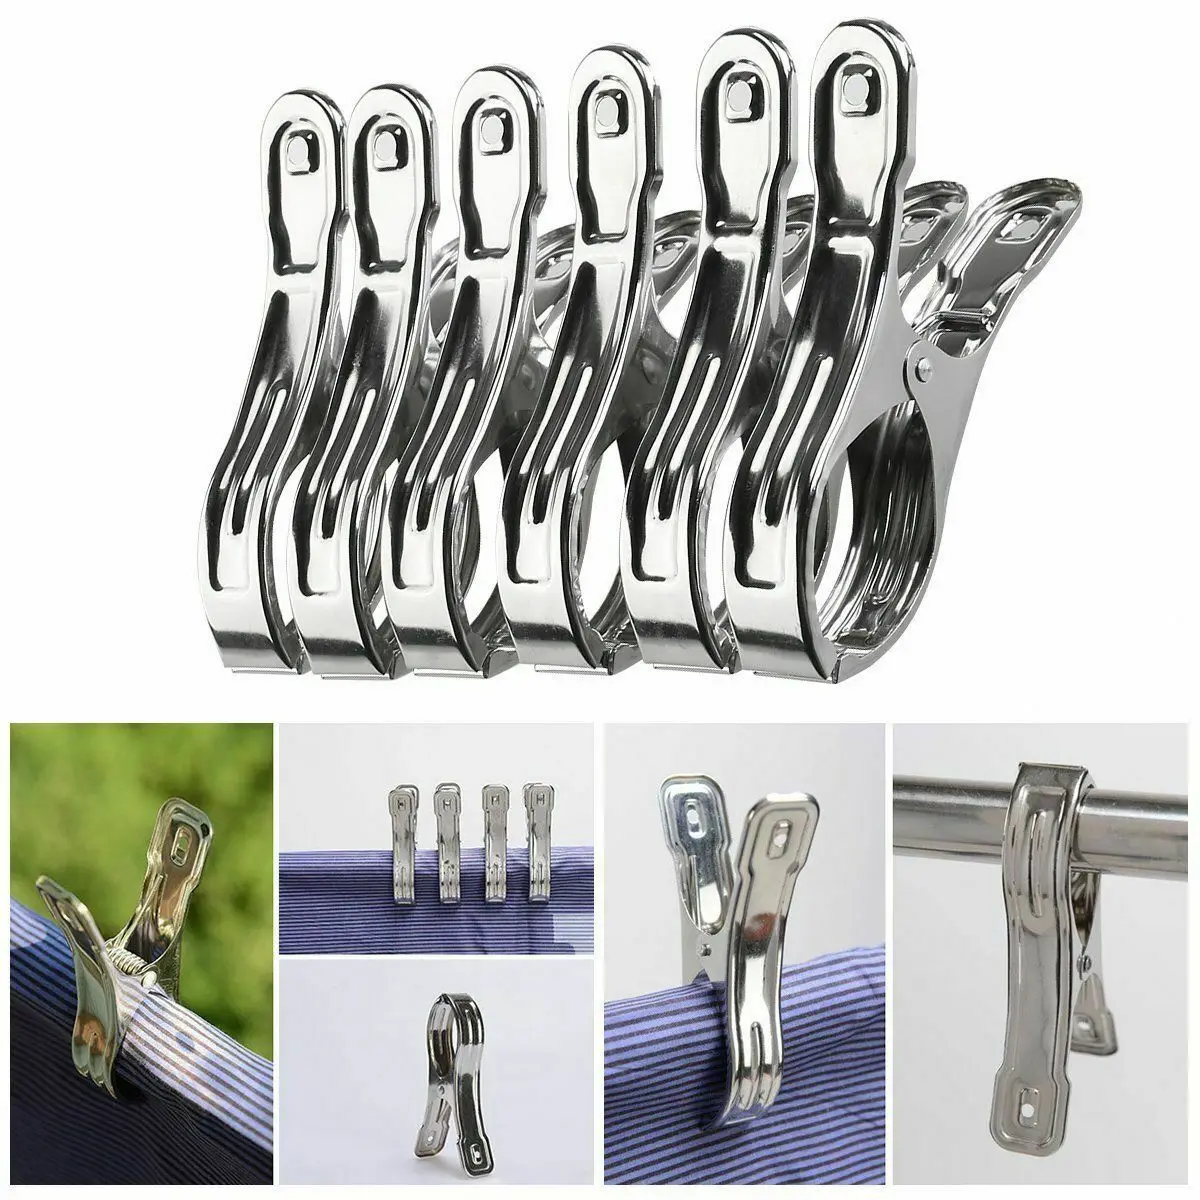 6pcs Stainless Steel Clothes Clamps Large Hanger Clips Laundrypins Beach Towel Clips Sunbed Sheet Drying Cleaning Accessories